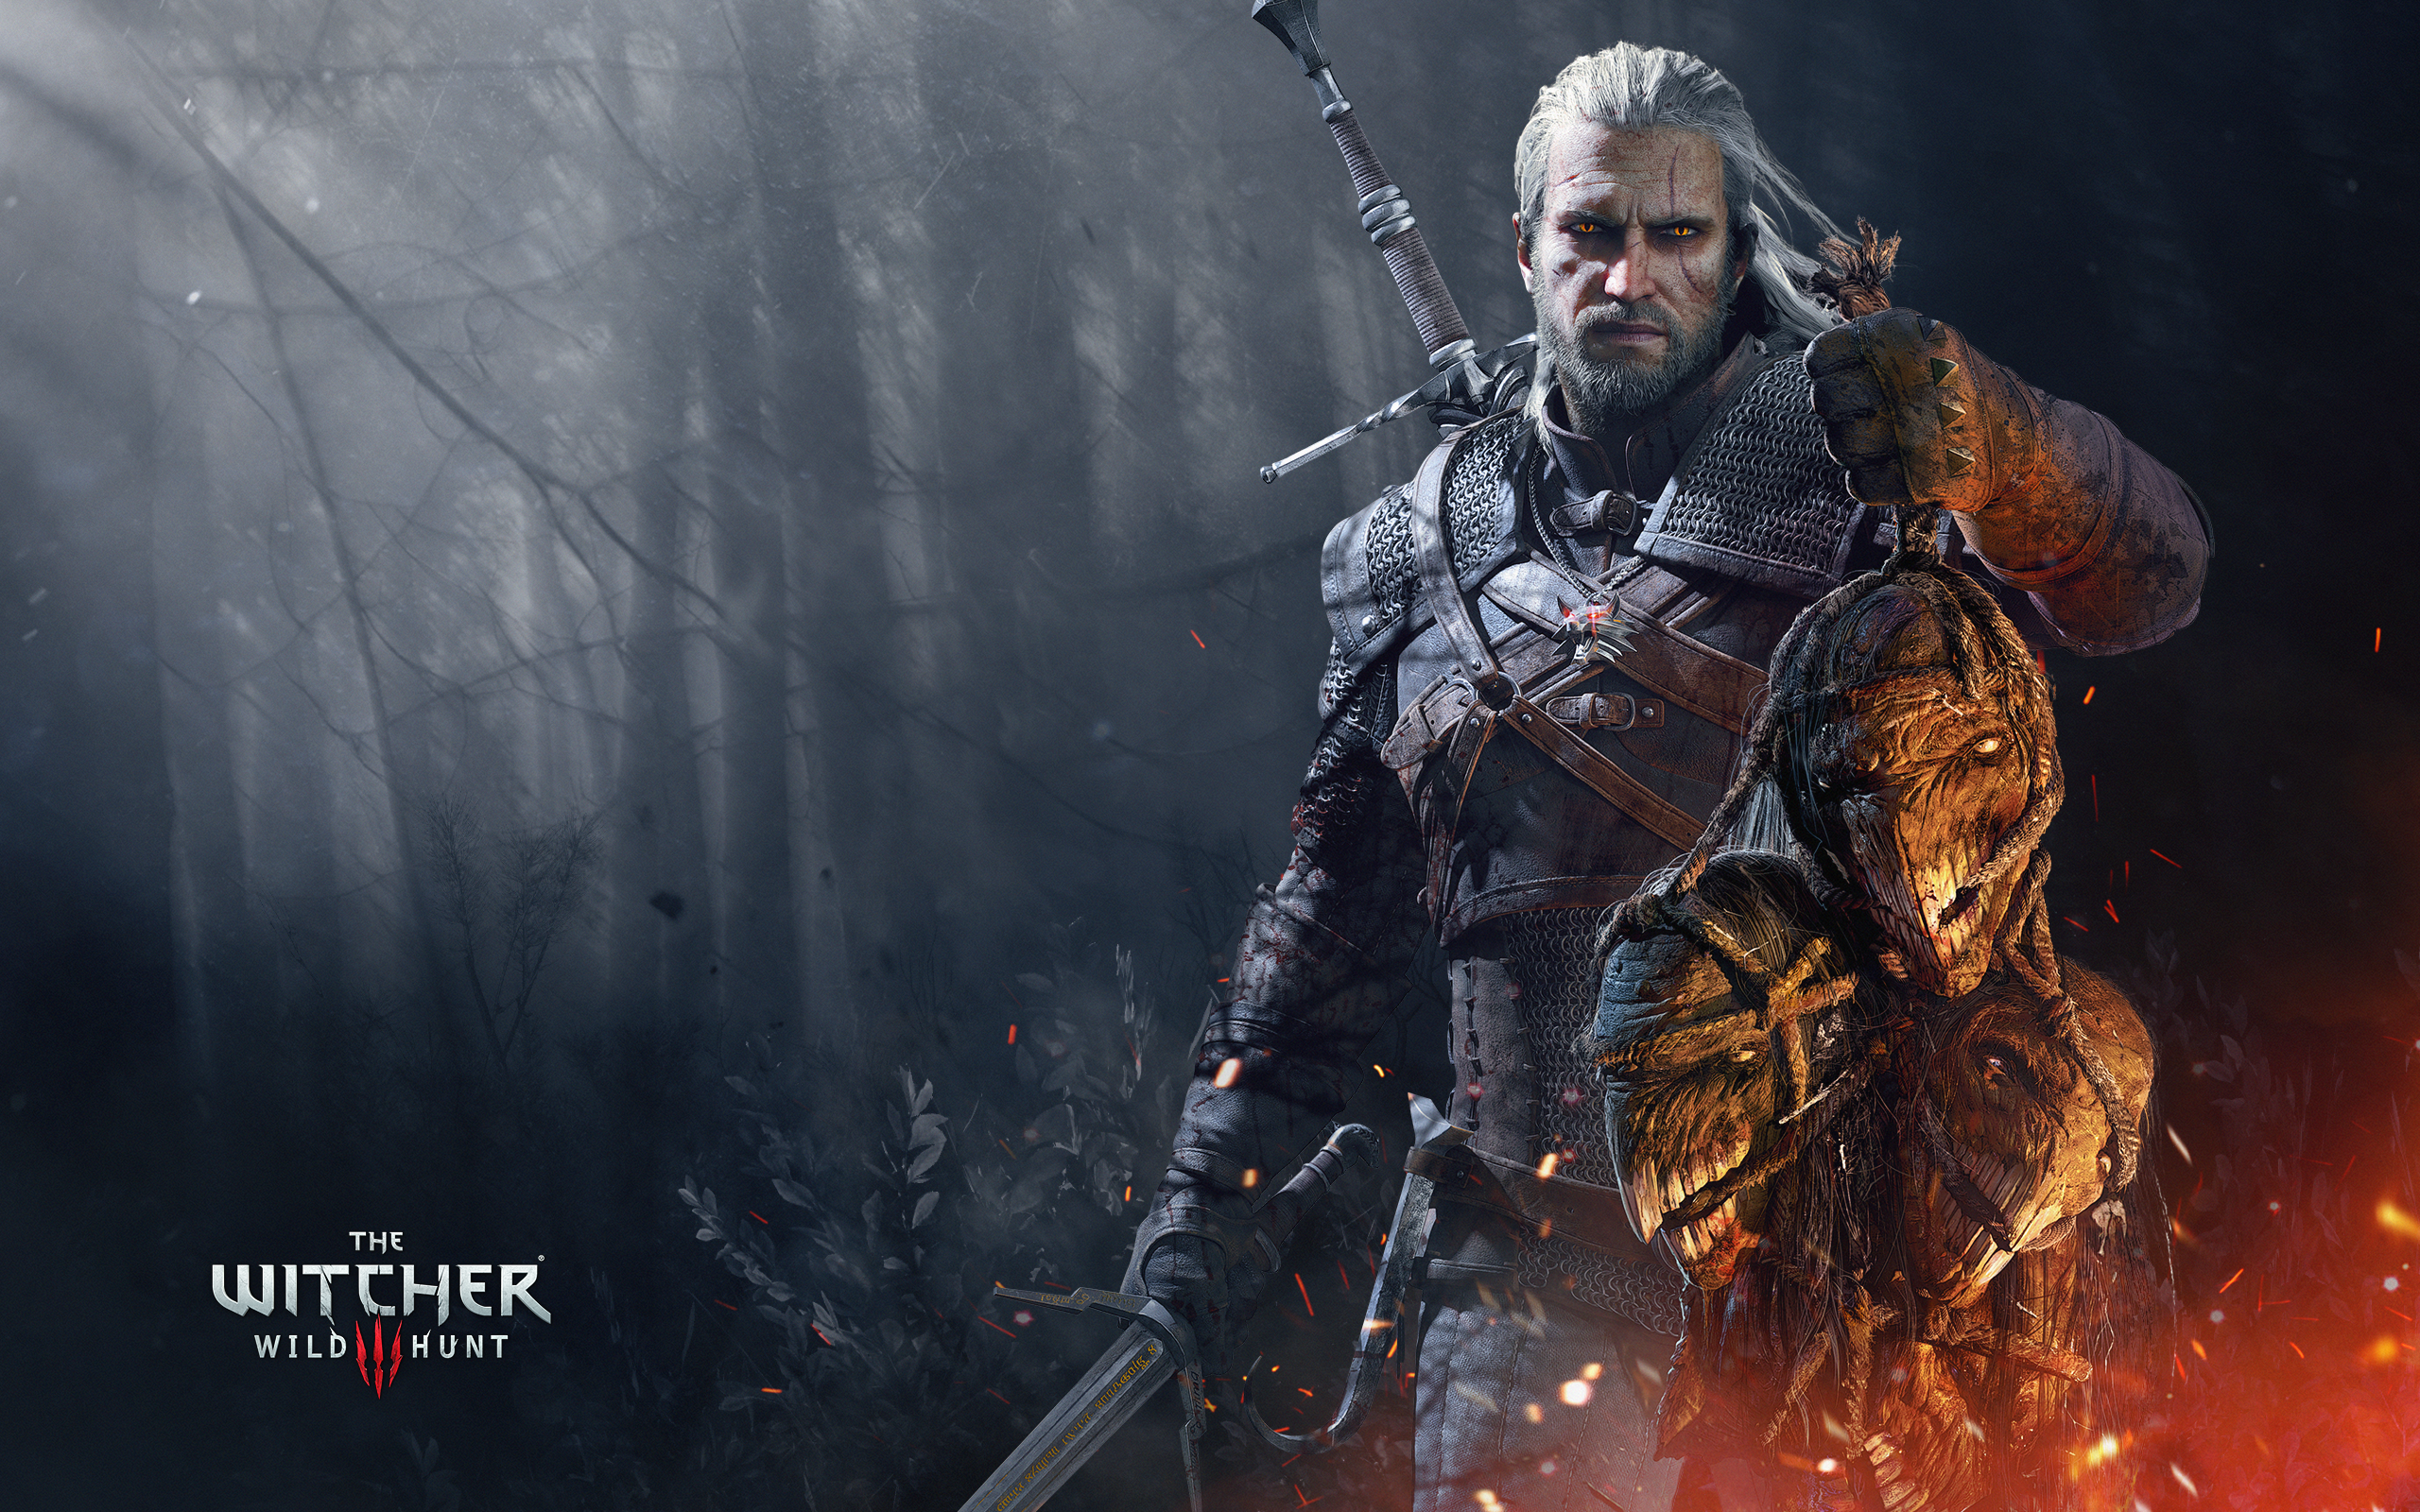 A list of Handpicked The witcher 3 mods to Enhance your Game Experience